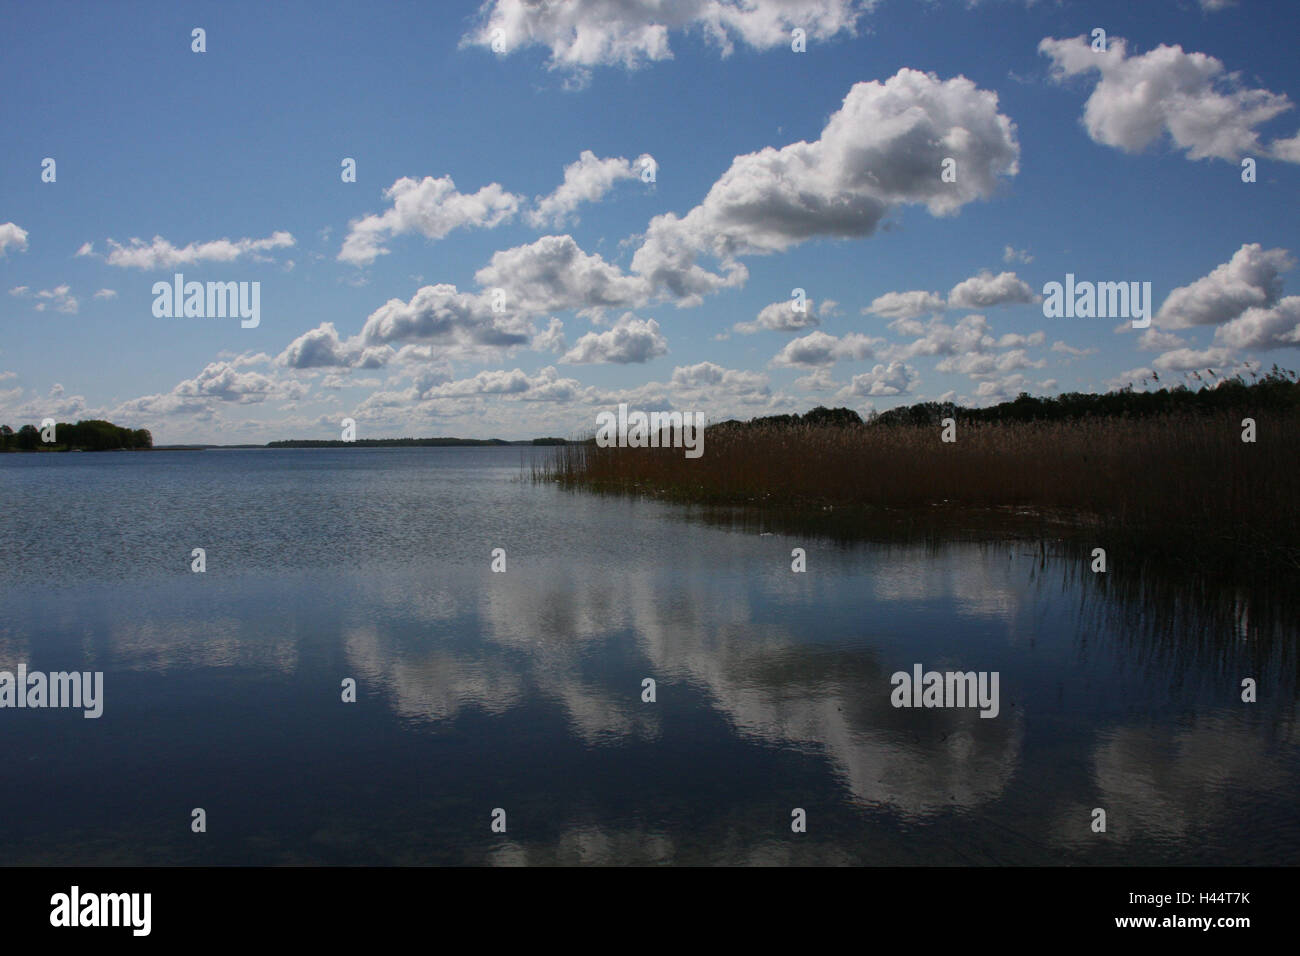 Poland, Masuria, lake, destination, nature, water, view, heaven, cloudy sky, clouds, rest, silence, Idyll, Stock Photo